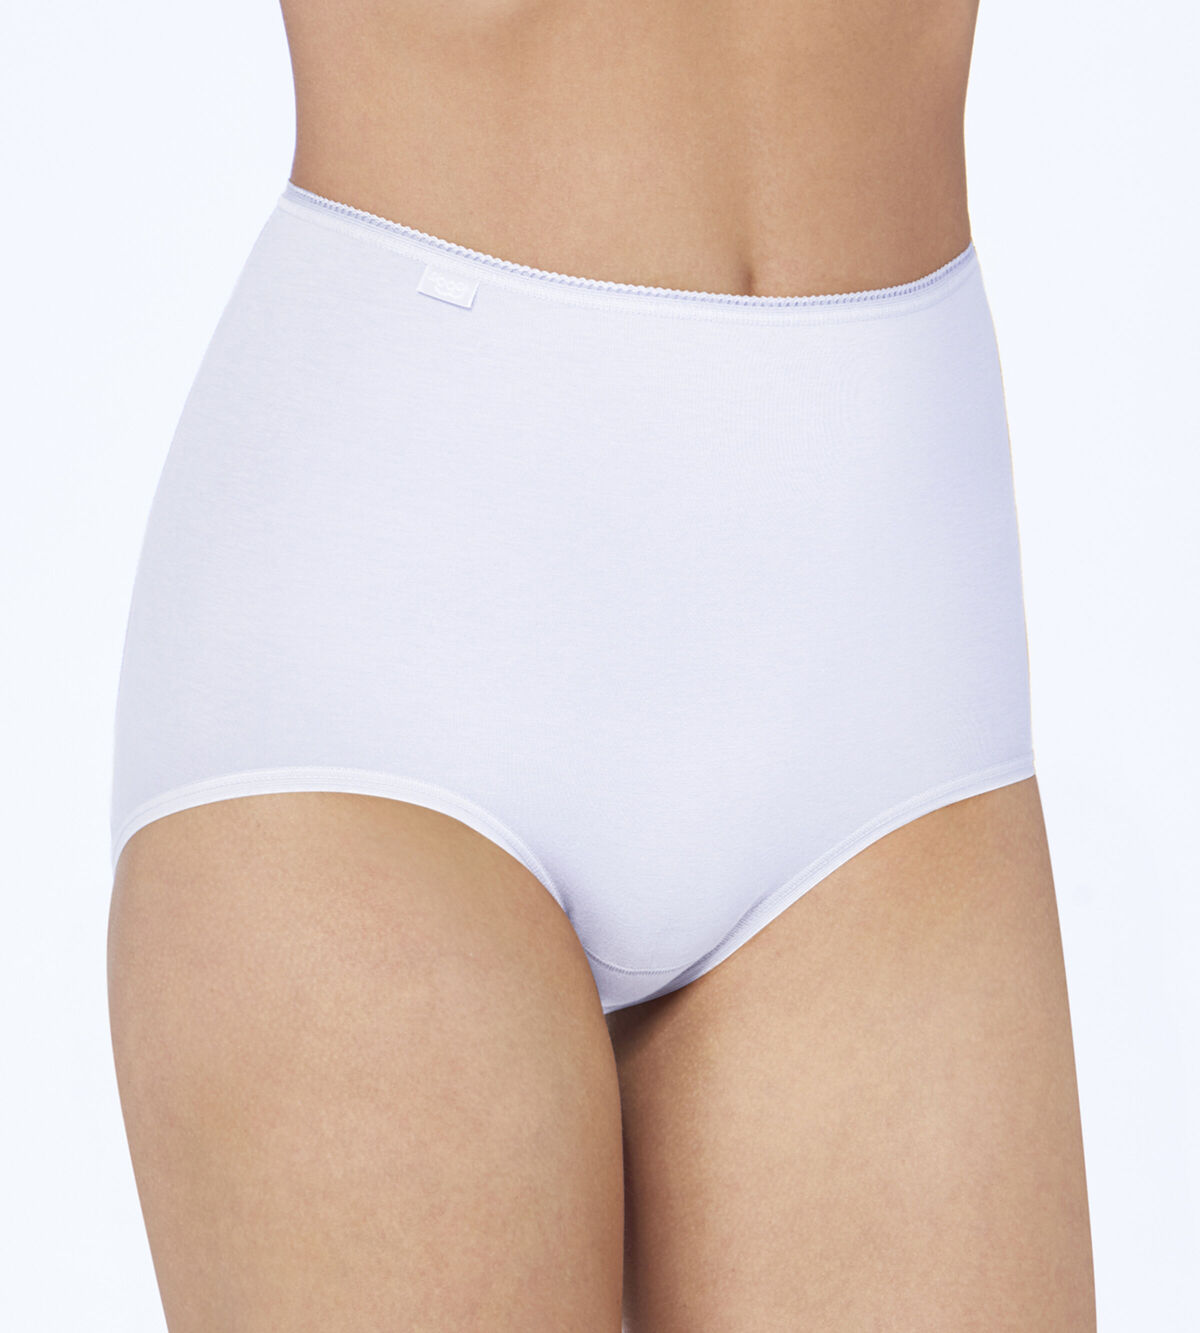 TRIUMPH ELASTICROSS COTTON 05 H SUPPORT SMOOTH PANTY IN WHITE